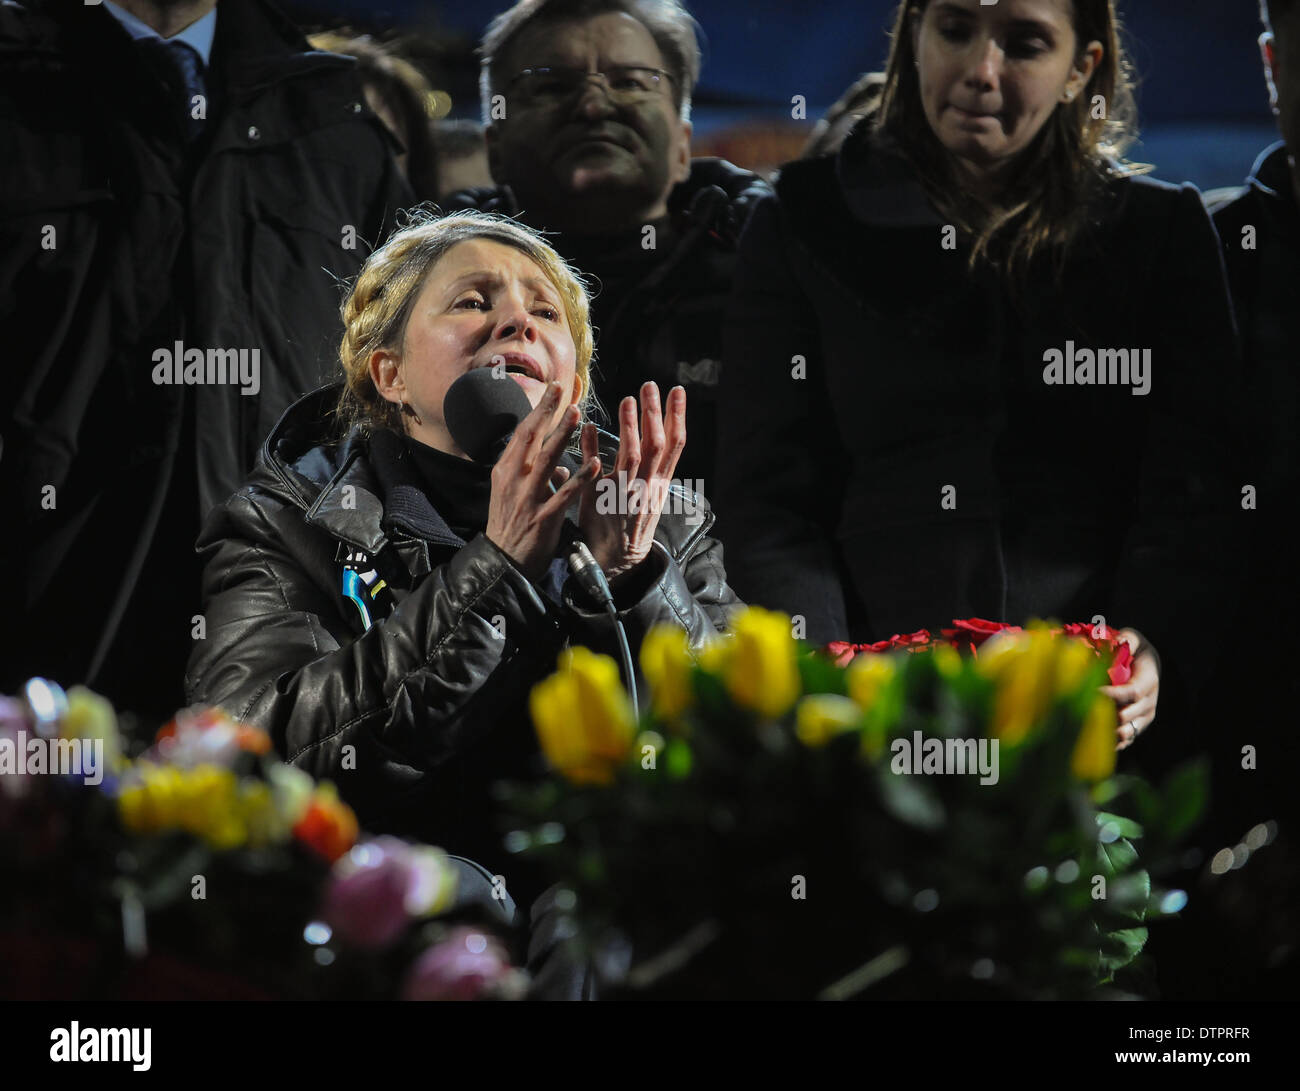 Kiev, Ukraine. 22nd Feb, 2014. Former Ukrainian Prime Minister Yulia Tymoshenko addresses her supporters following her release from prison at the Independence Plaza in Kiev, Ukraine, Feb. 22, 2014. Credit:  Dai Tianfang/Xinhua/Alamy Live News Stock Photo